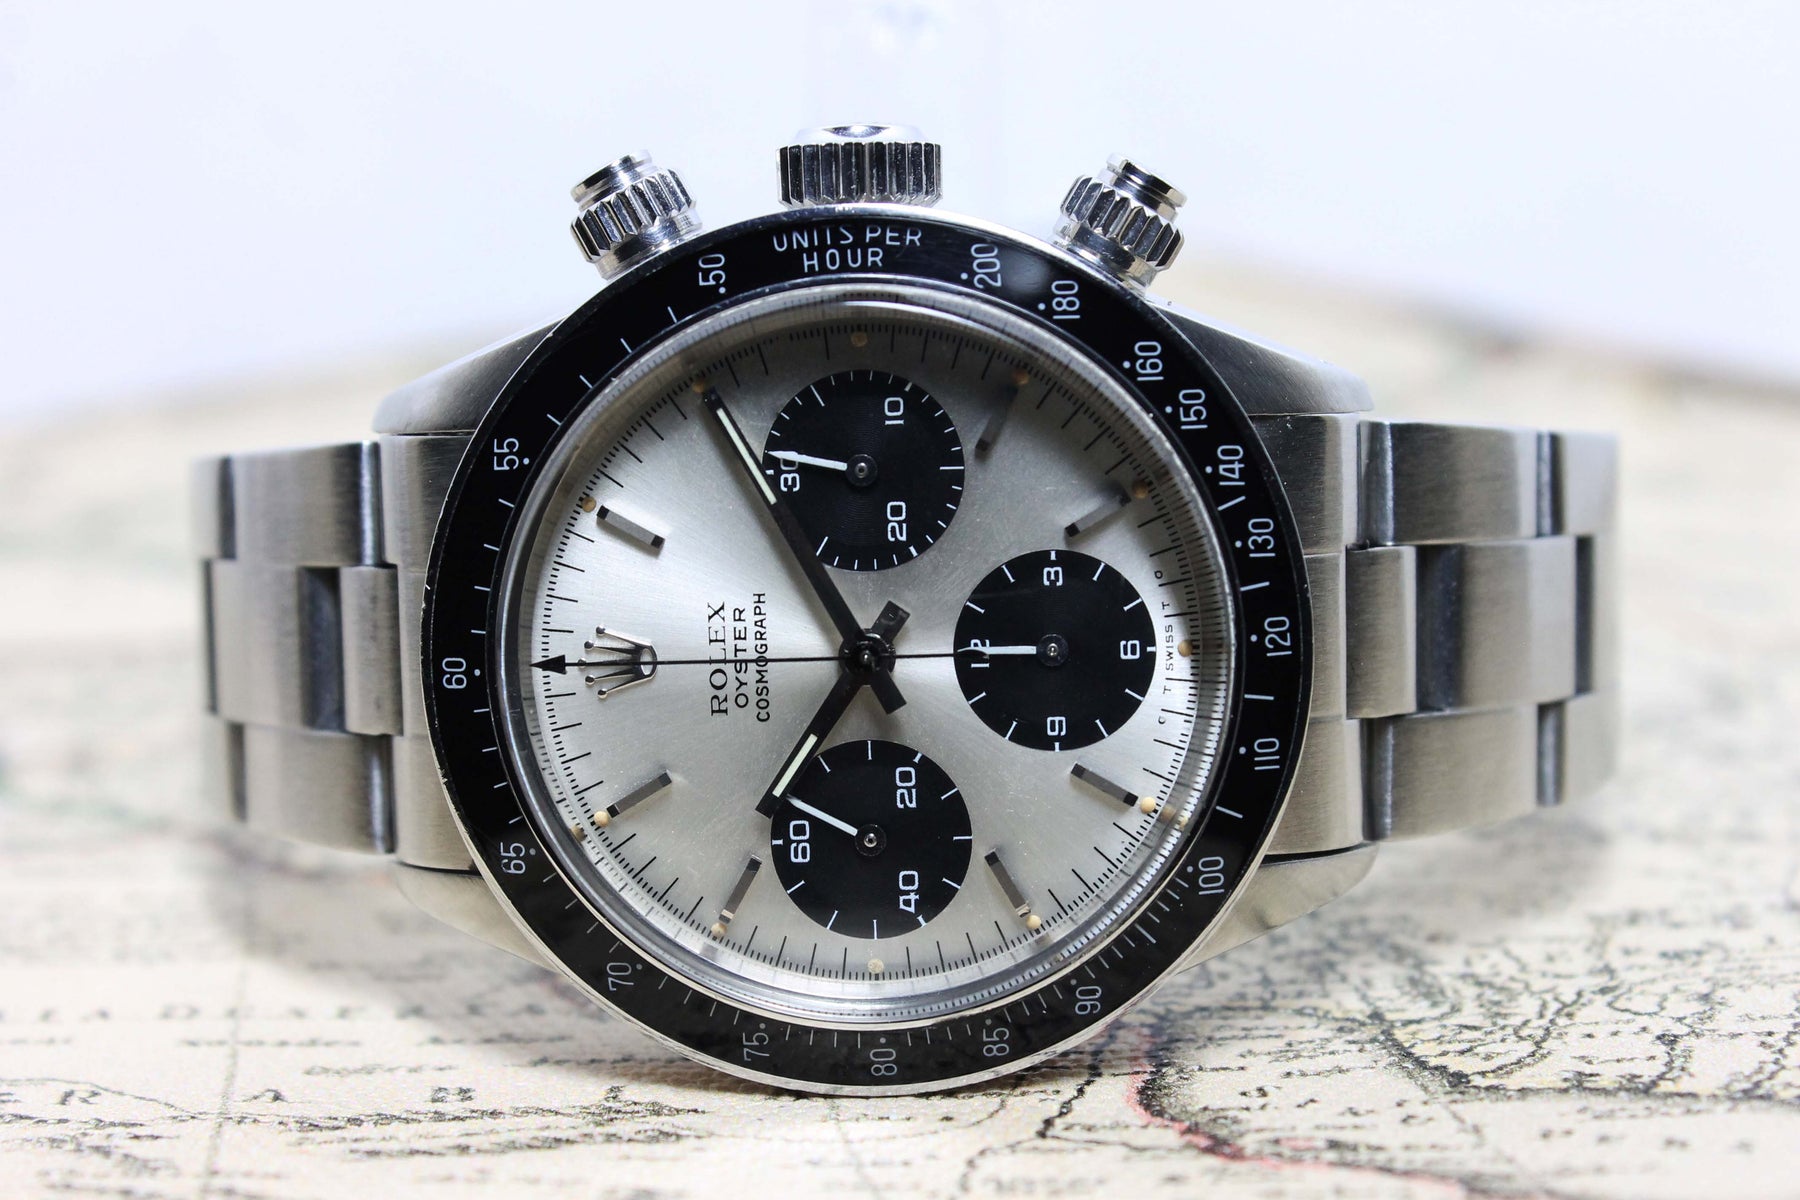 1976 Rolex Daytona Ref. 6263 (with Box & Papers)